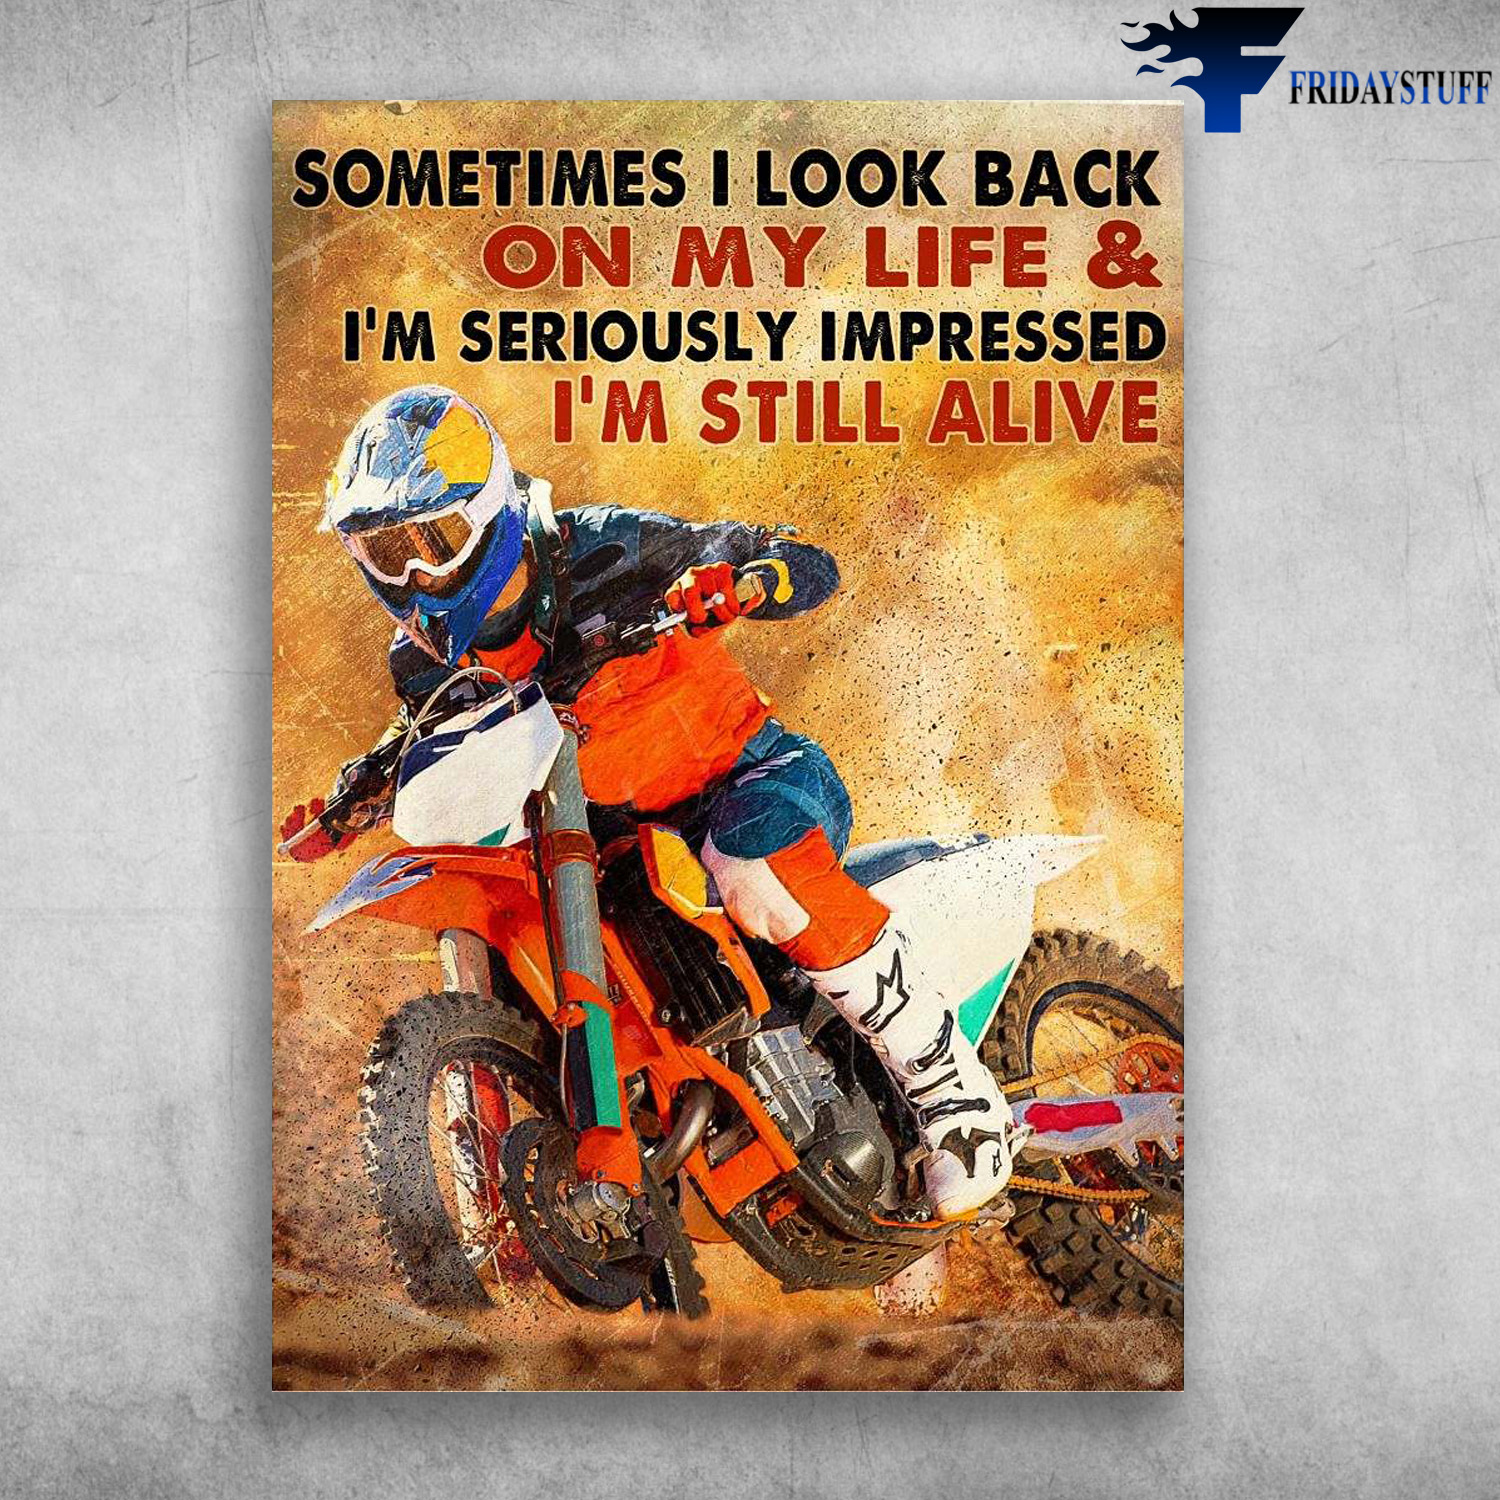 Motocross Man, Dirtbike Racer - Sometimes I Look Back, On My Life, And I'm Seriously Impressed, I'm Still Alive